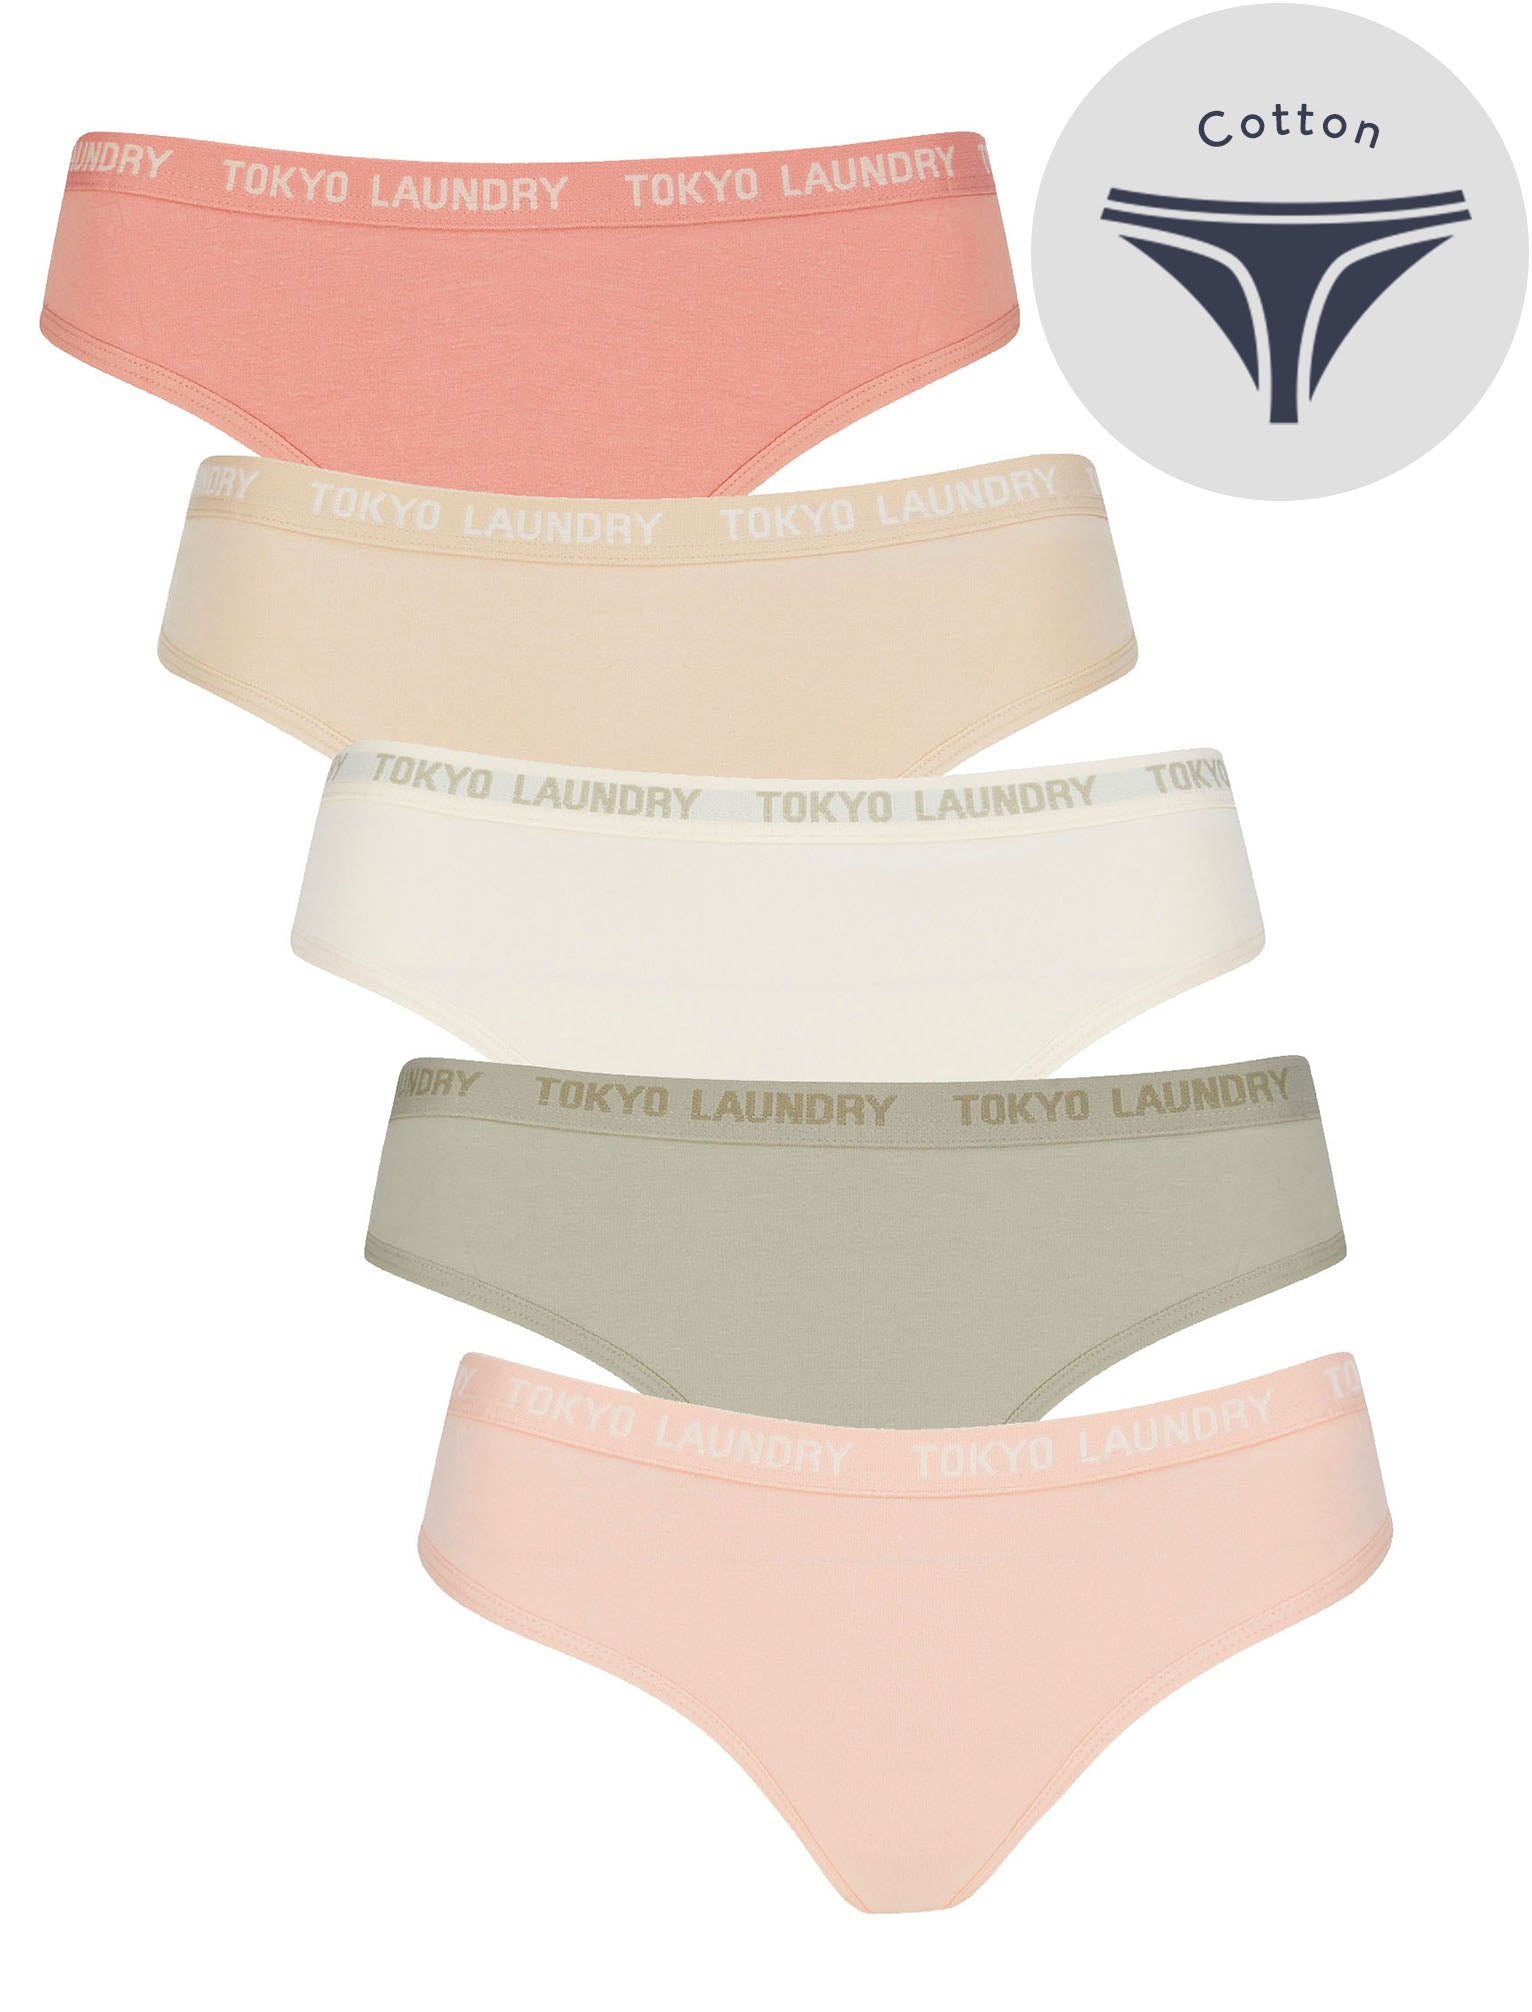 Womens Underwear Pampass (5 Pack) Cotton Assorted Thongs in Rose Dawn / Smoke Gray / Pastel Parchmen / Abbey Stone / Rose Smoke - Tokyo Laundry / S - Tokyo Laundry